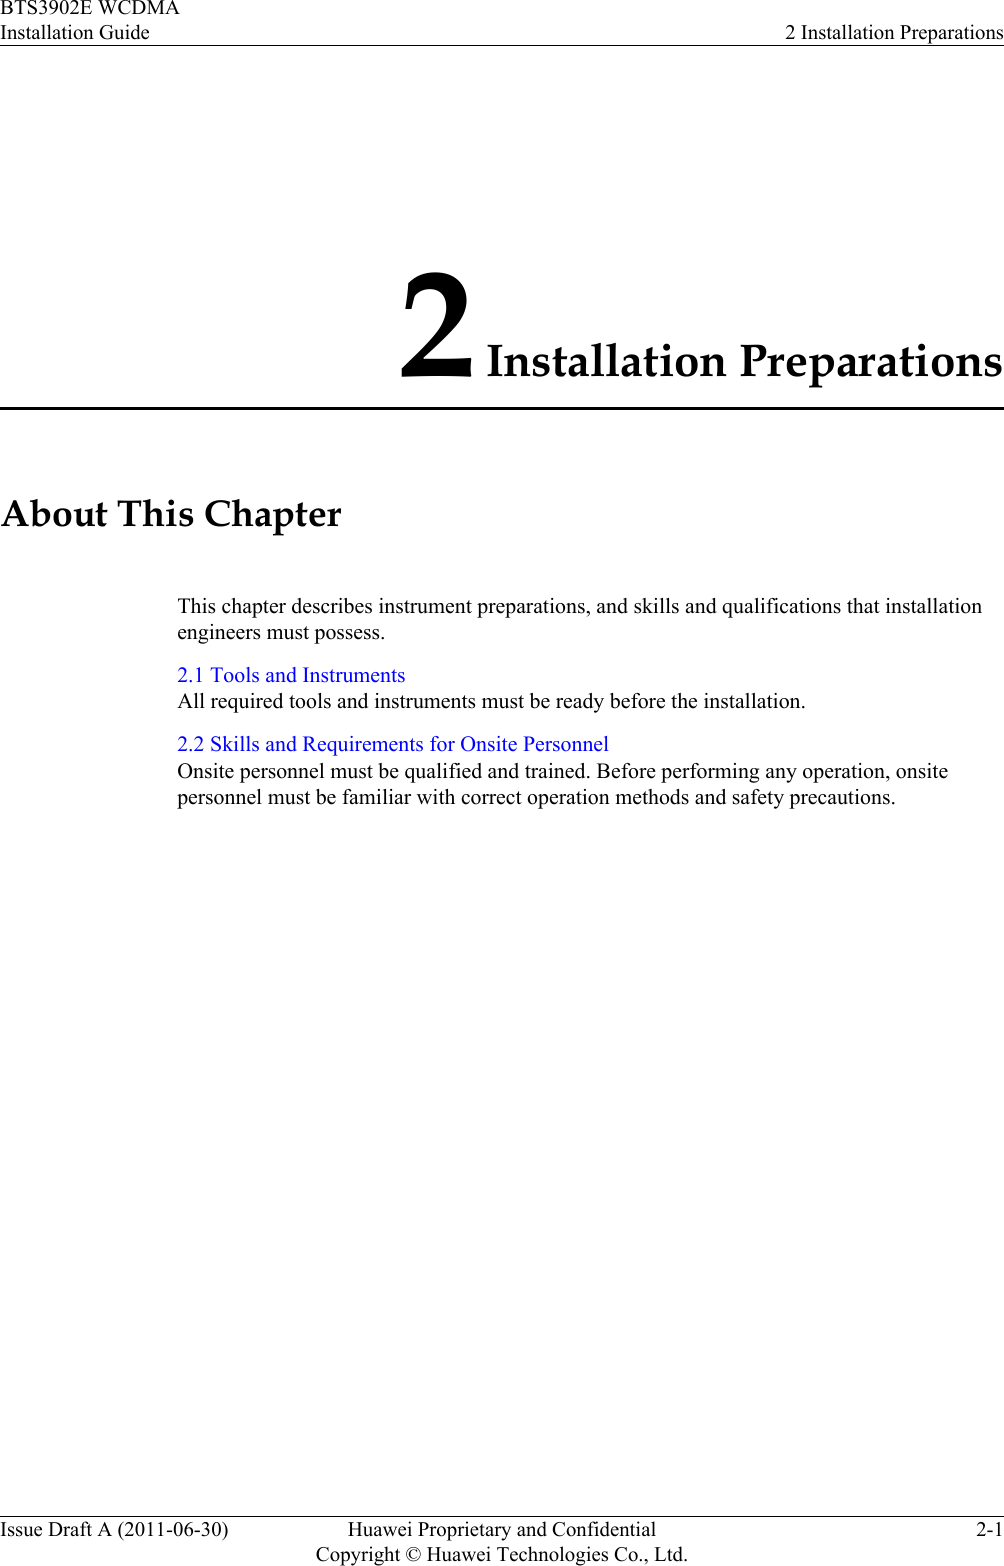 2 Installation PreparationsAbout This ChapterThis chapter describes instrument preparations, and skills and qualifications that installationengineers must possess.2.1 Tools and InstrumentsAll required tools and instruments must be ready before the installation.2.2 Skills and Requirements for Onsite PersonnelOnsite personnel must be qualified and trained. Before performing any operation, onsitepersonnel must be familiar with correct operation methods and safety precautions.BTS3902E WCDMAInstallation Guide 2 Installation PreparationsIssue Draft A (2011-06-30) Huawei Proprietary and ConfidentialCopyright © Huawei Technologies Co., Ltd.2-1